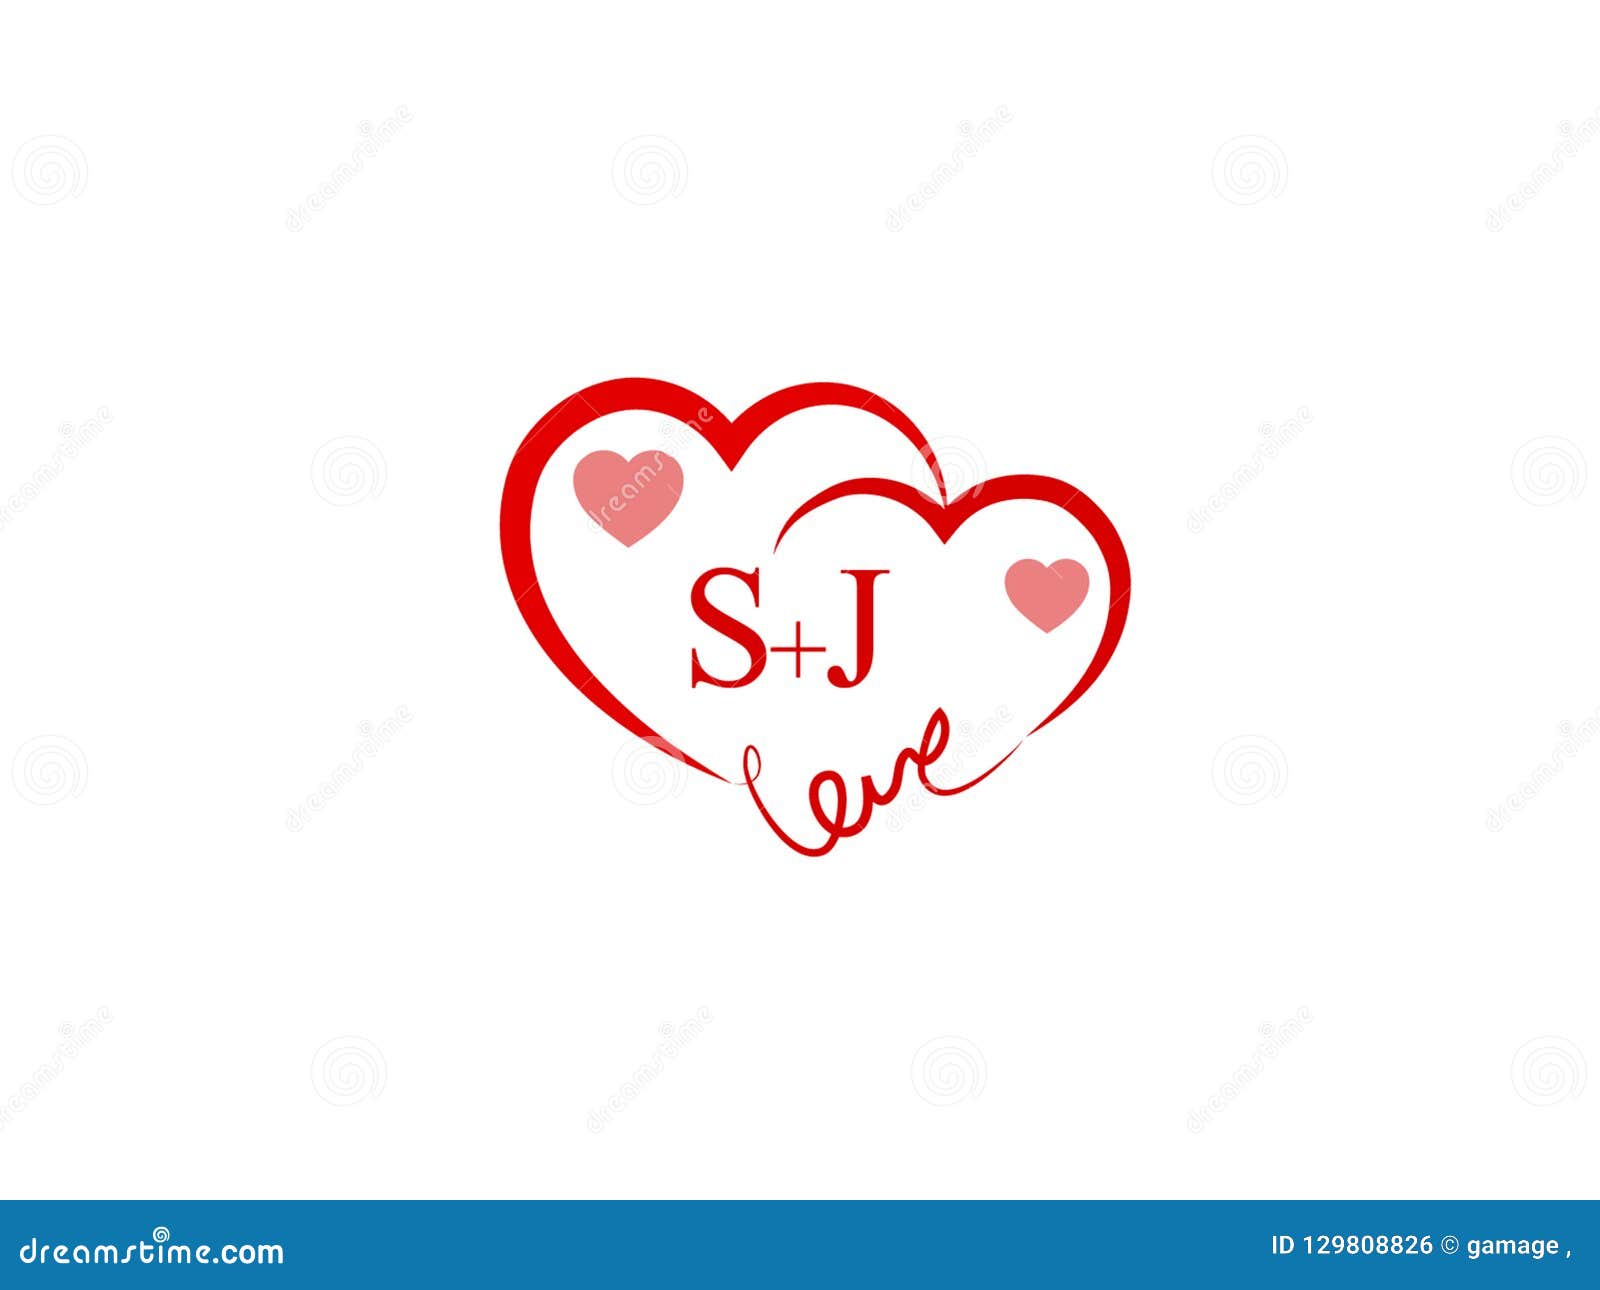 Pm Initial Letter Logo Ornament Heart Stock Vector (Royalty Free